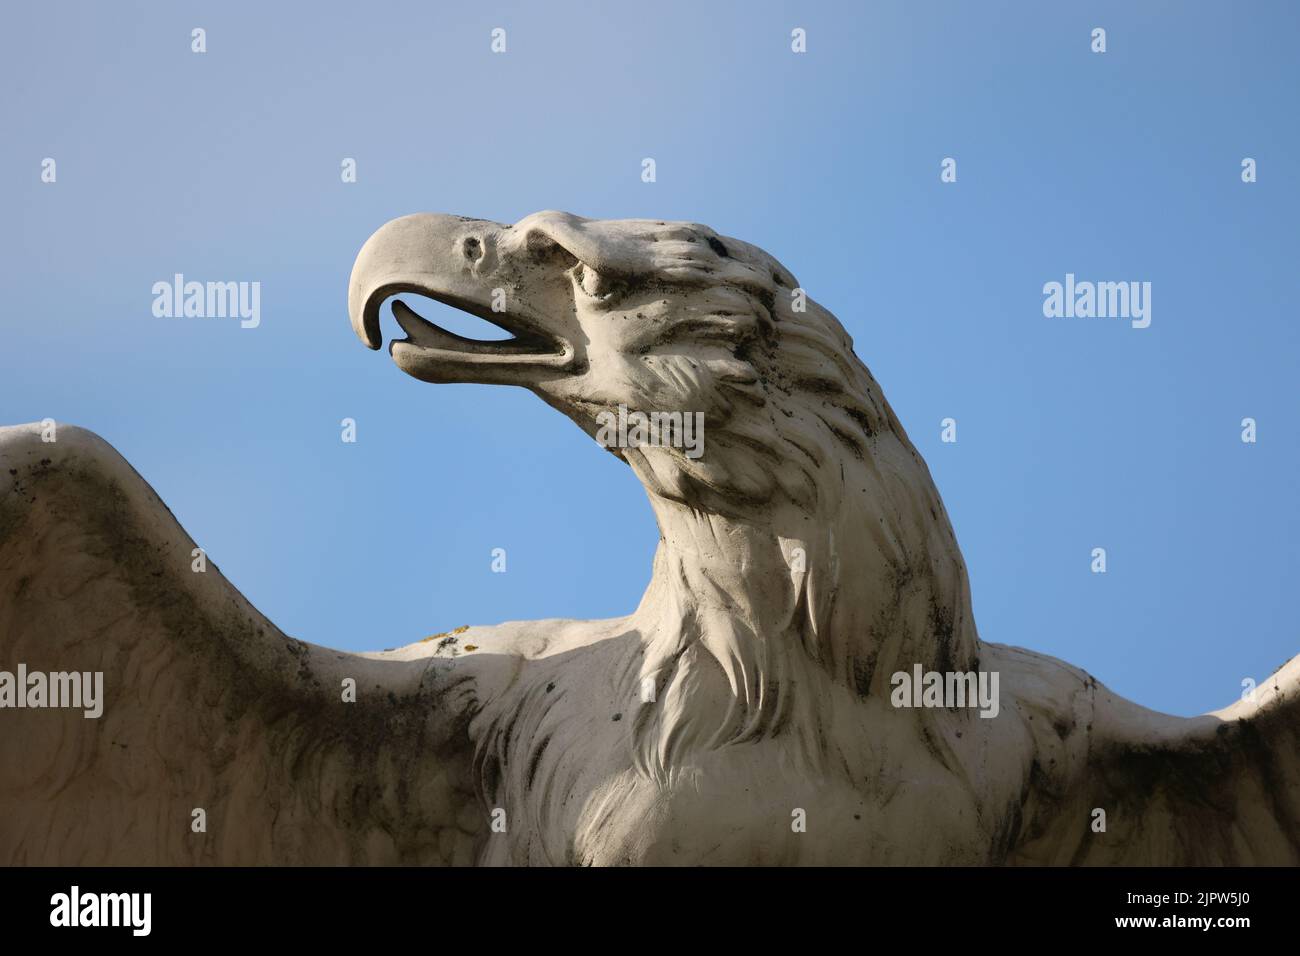 A closeup shot of a beautiful stone sculpture of an eagle under the blue sky Stock Photo